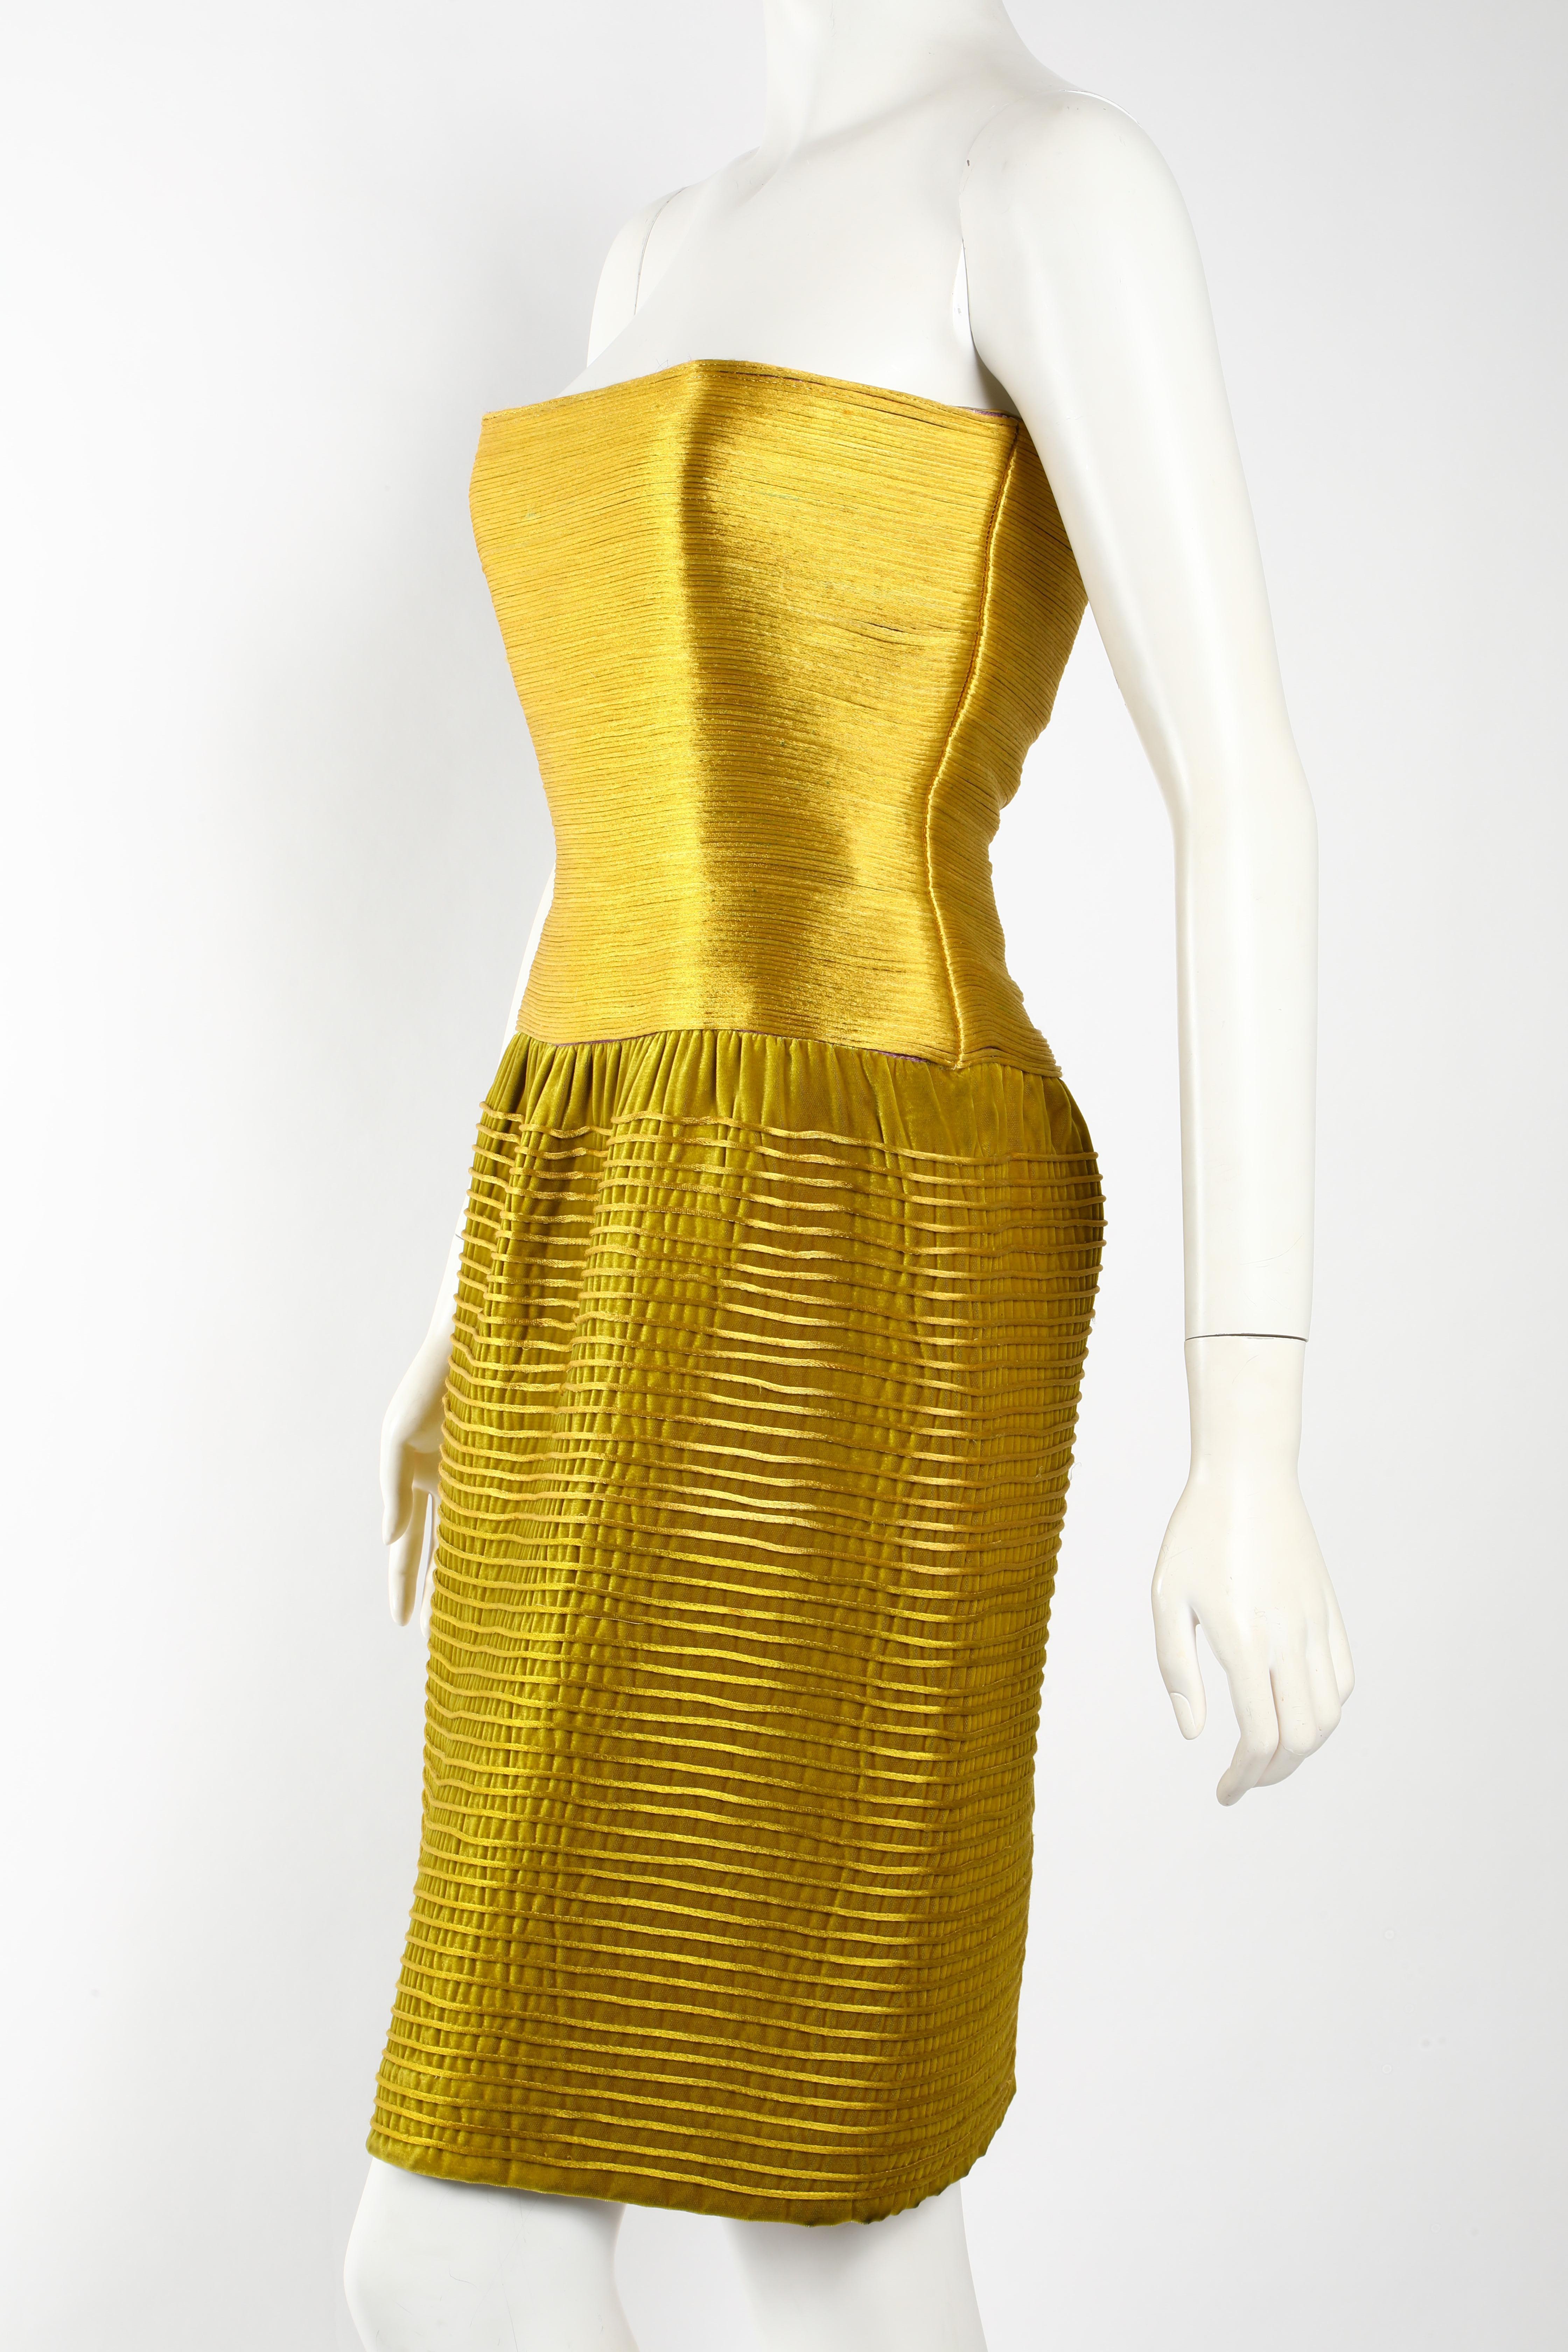 Vintage Oscar De La Renta knee-length cocktail dress of gold piping with a gold chiffon skirt. Structured, strapless bodice with boning that keeps the silhouette. Size US 10. 